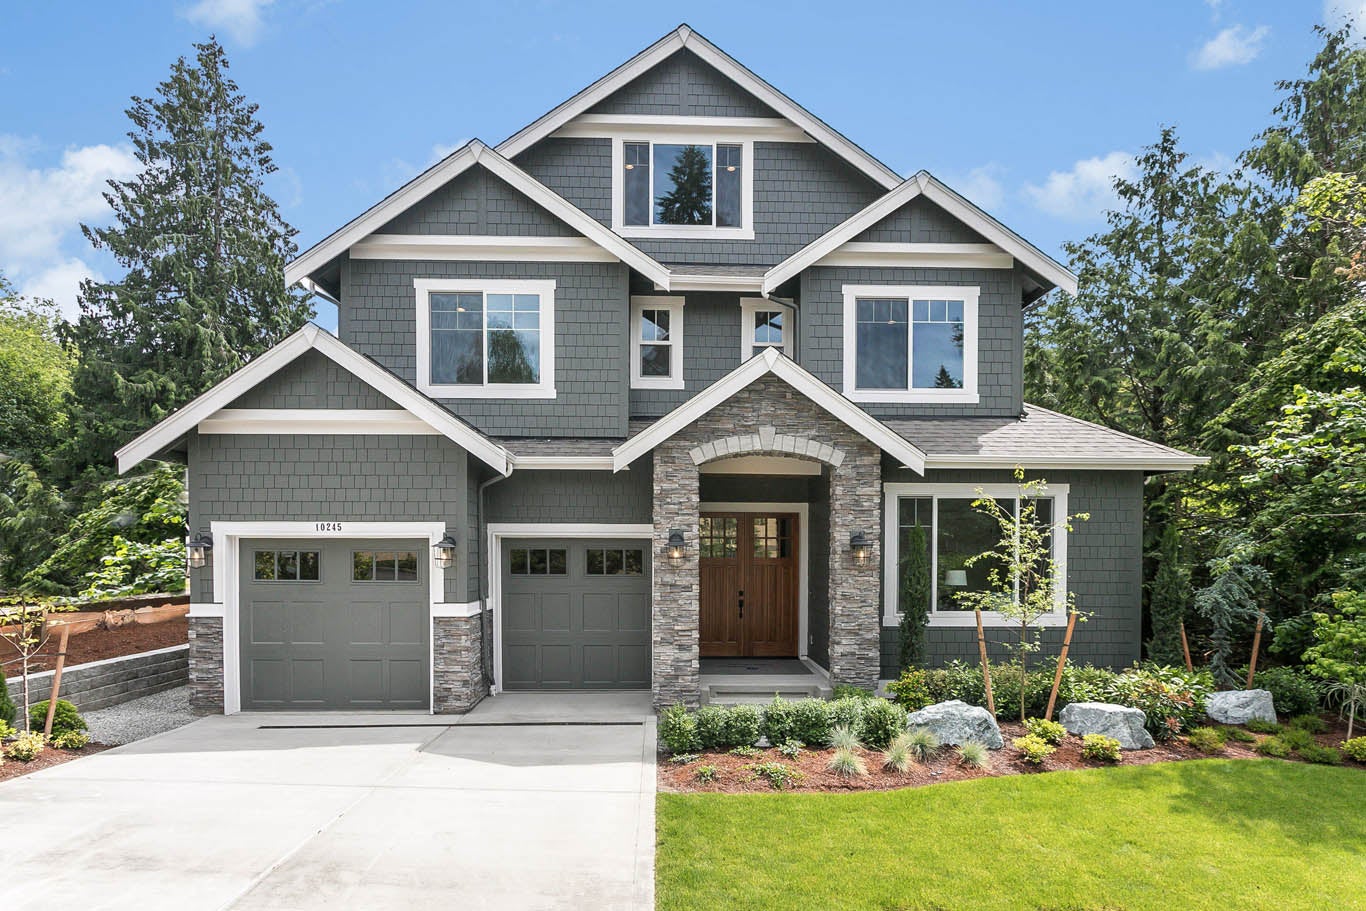 Gray house with white trim and stone accents